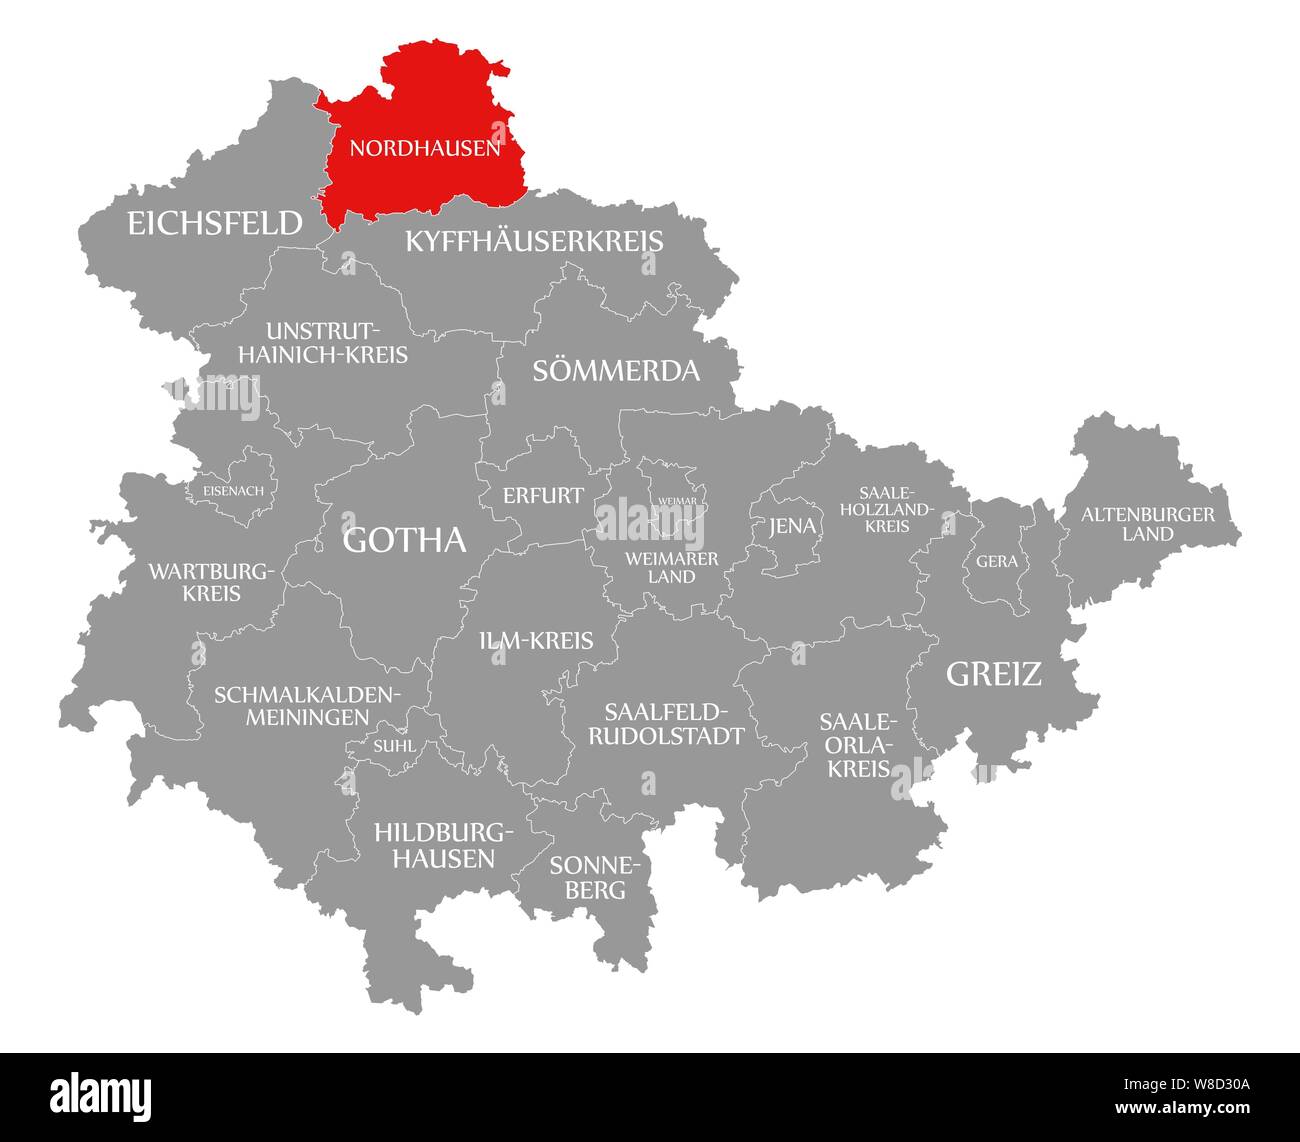 Nordhausen red highlighted in map of Thuringia Germany Stock Photo Alamy